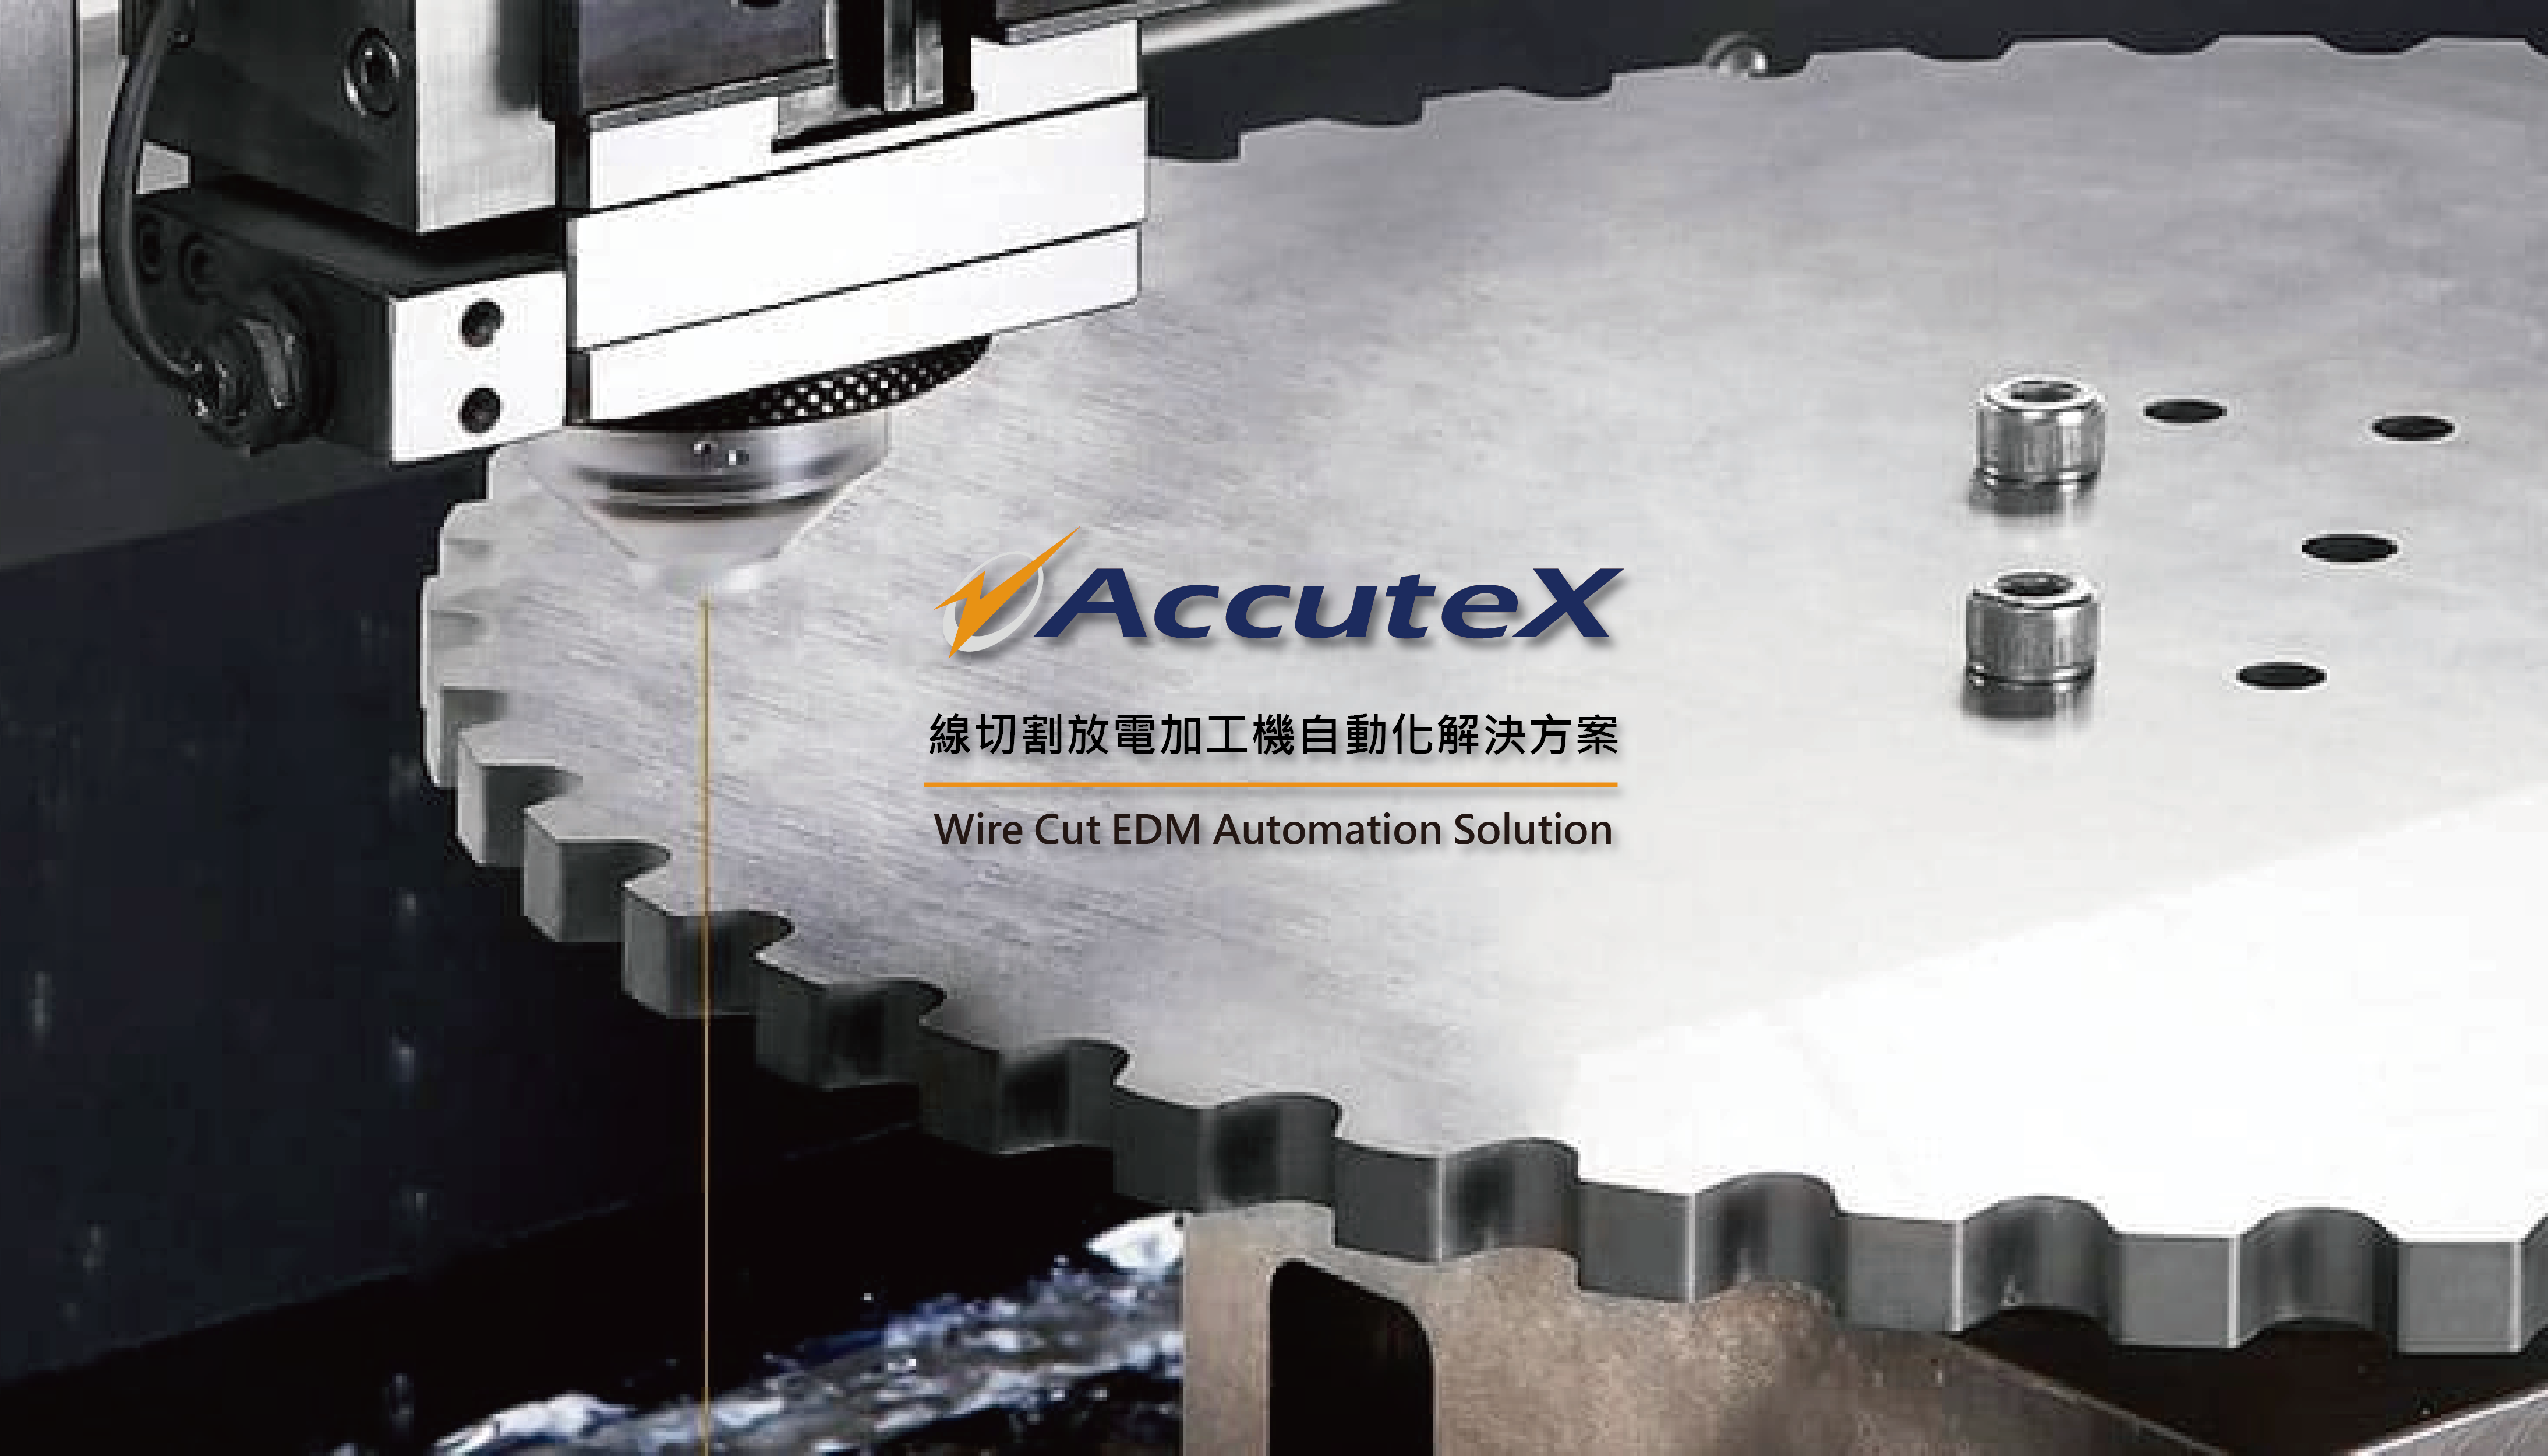 News|AccuteX — Wire Cut EDM Automation Solution ﹝Industry 4.0- Intelligent Manufacturing System﹞